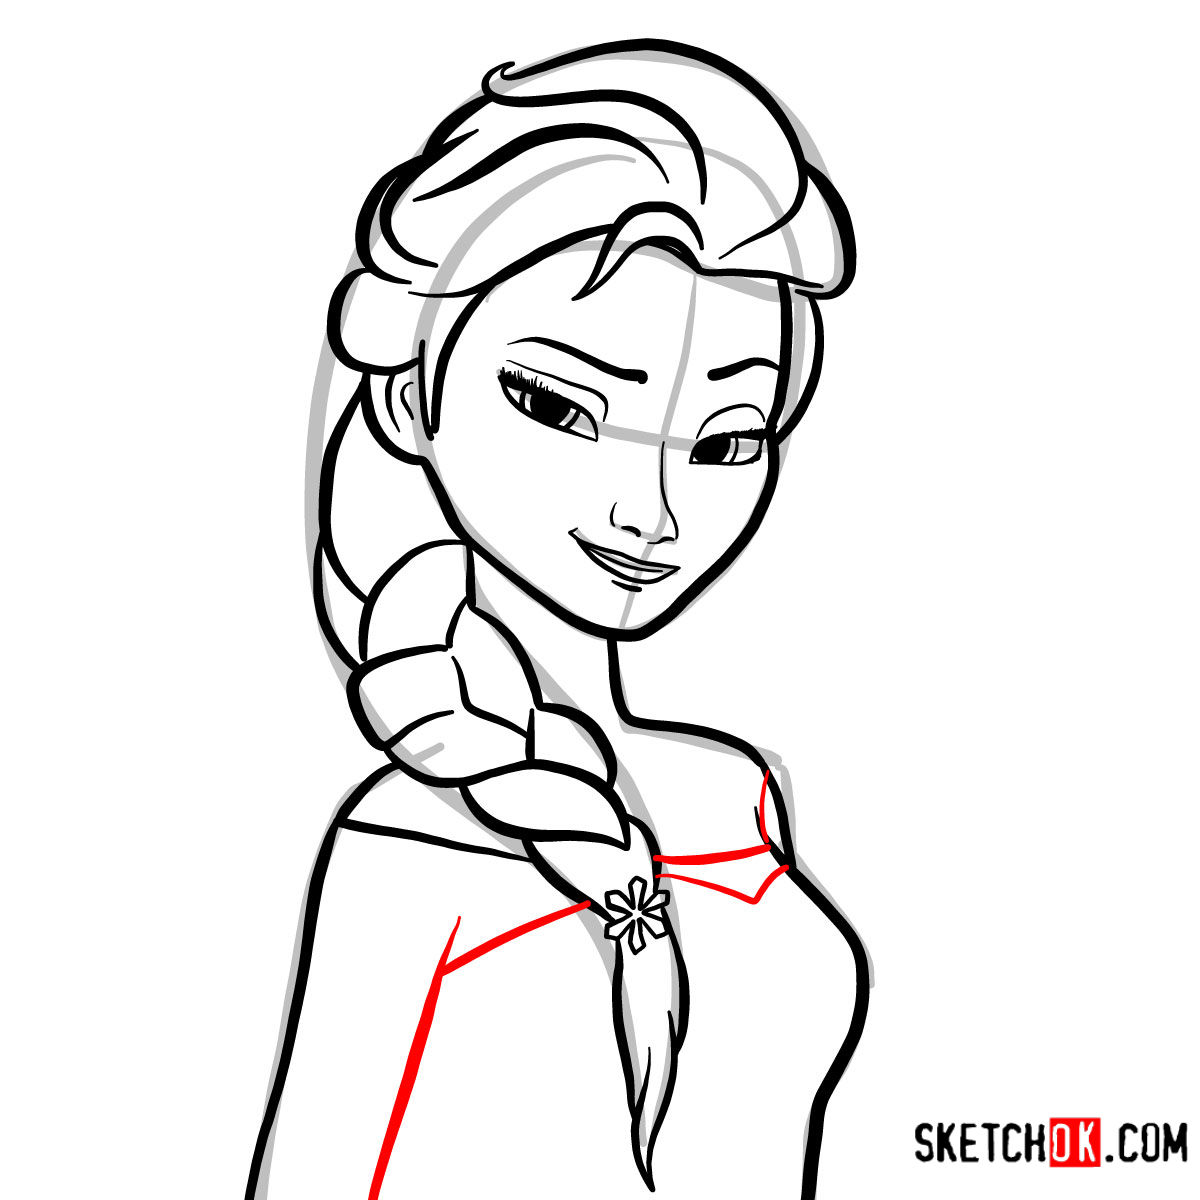 Step-by-step drawing guide of the portrait of Princess Elsa.